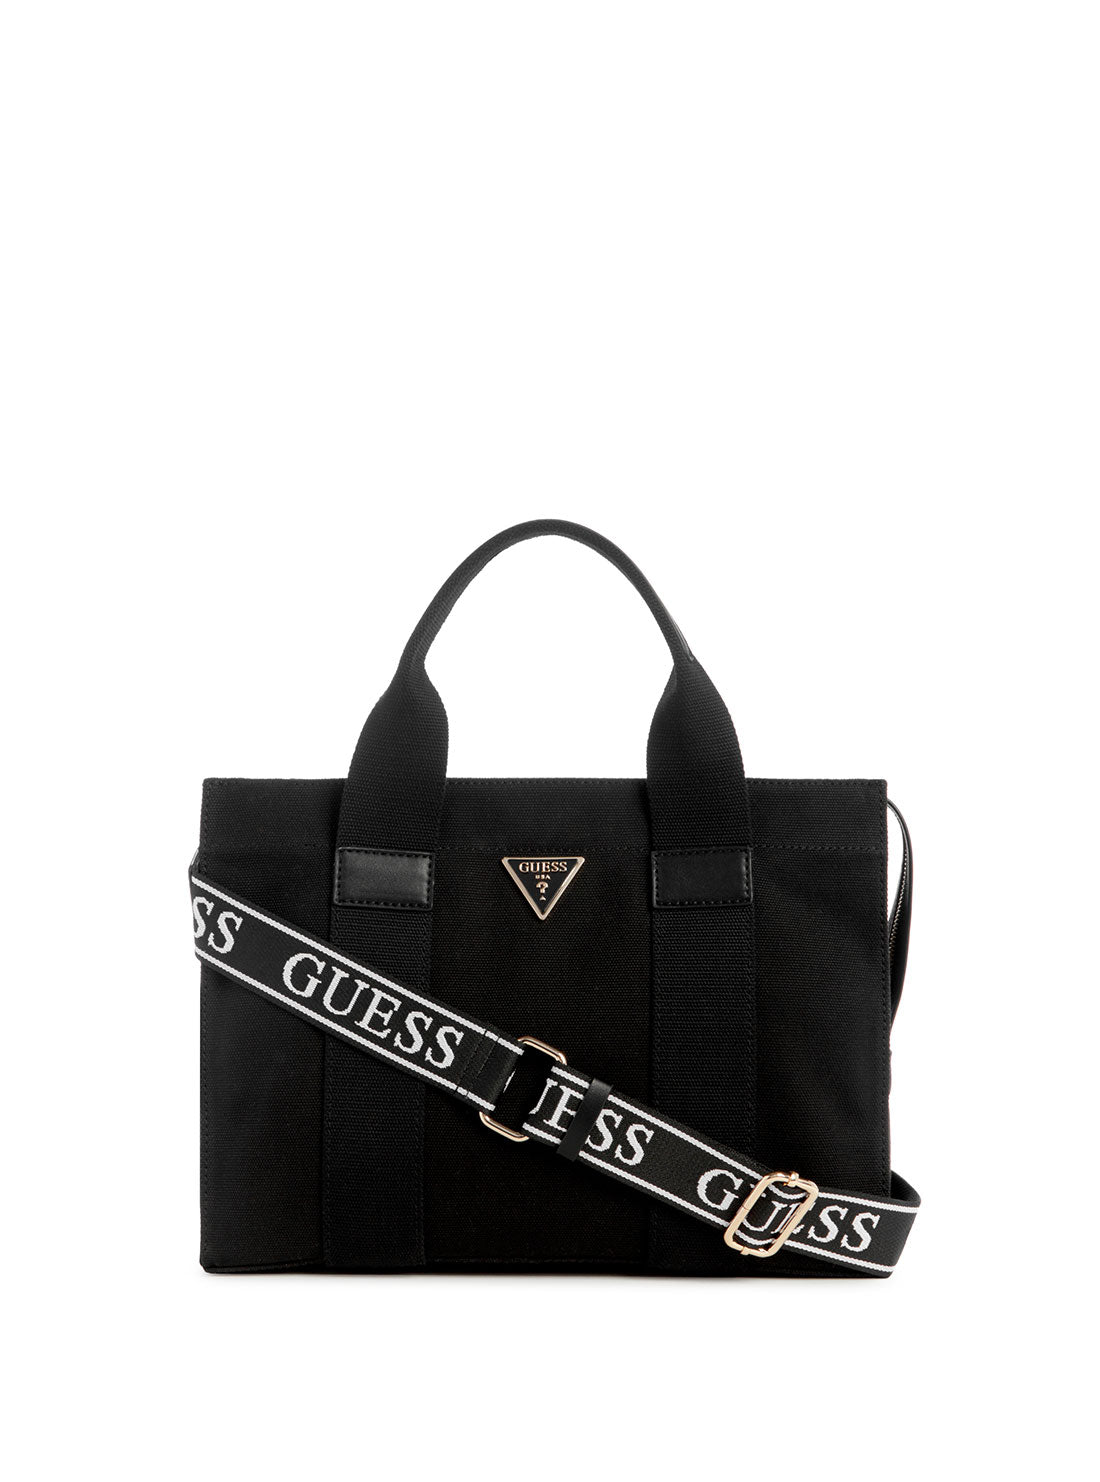 GUESS Black Canvas Small Tote Bag front view